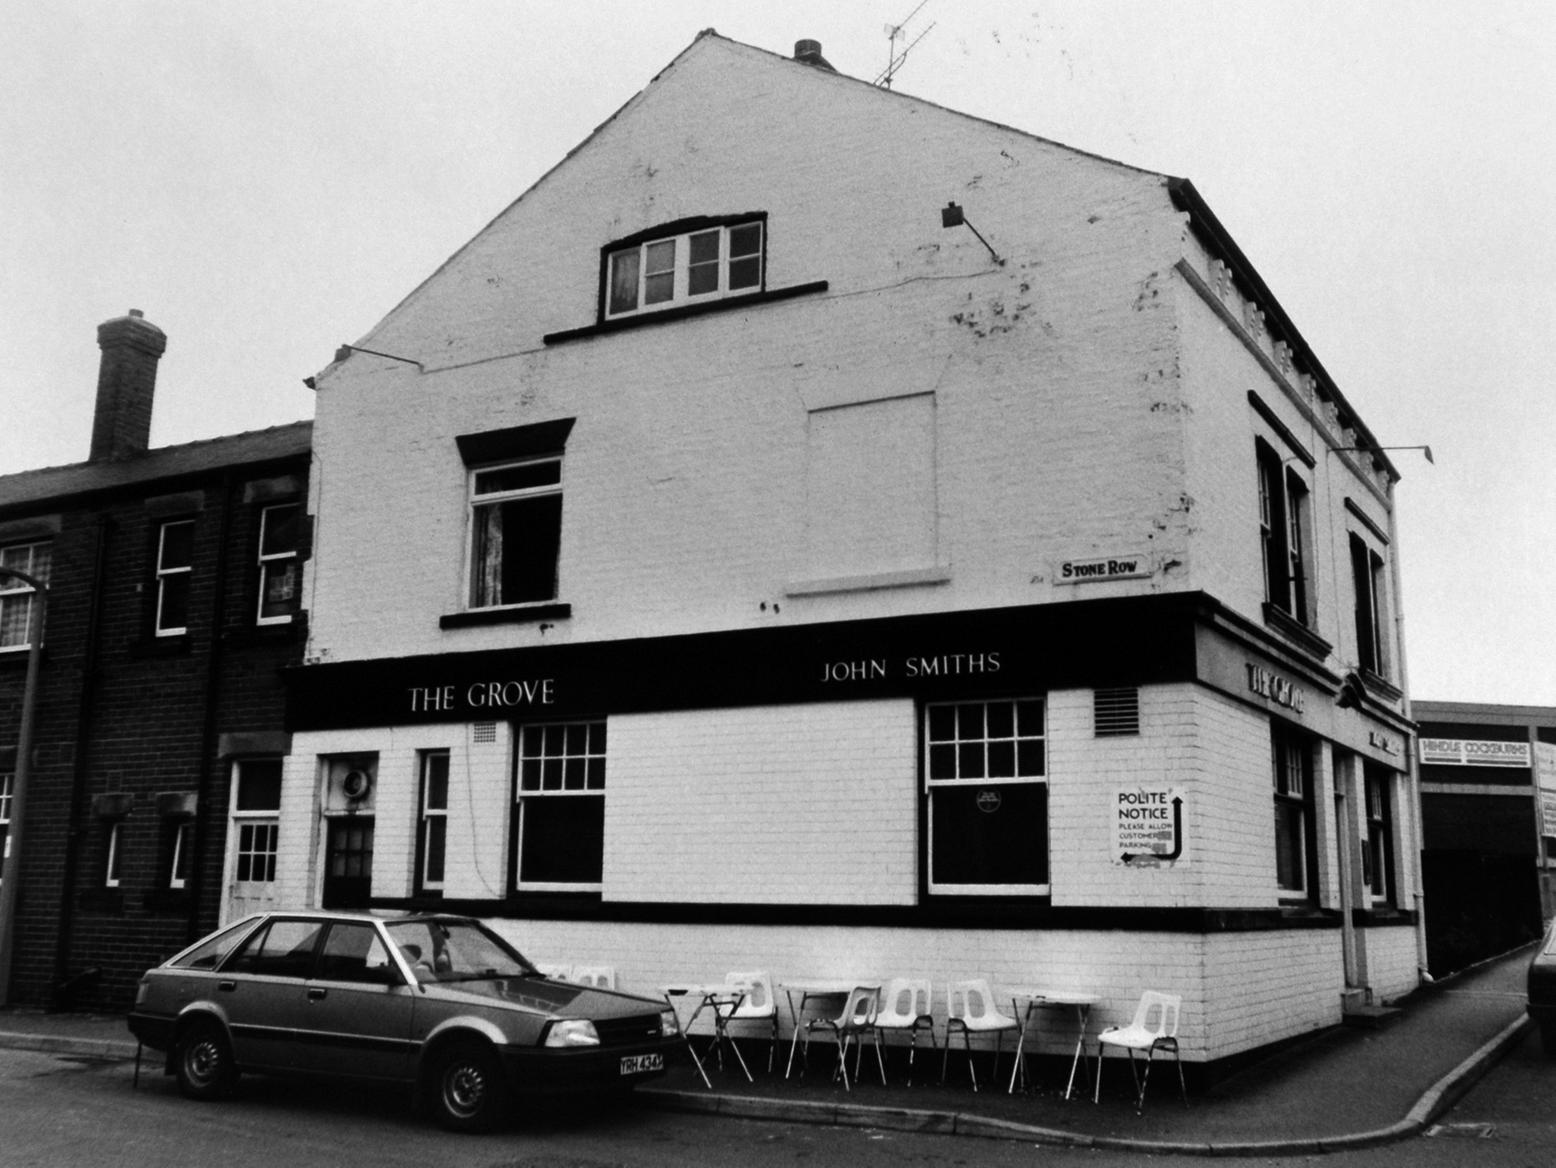 The Grove pub. Were you a regular back in the day?